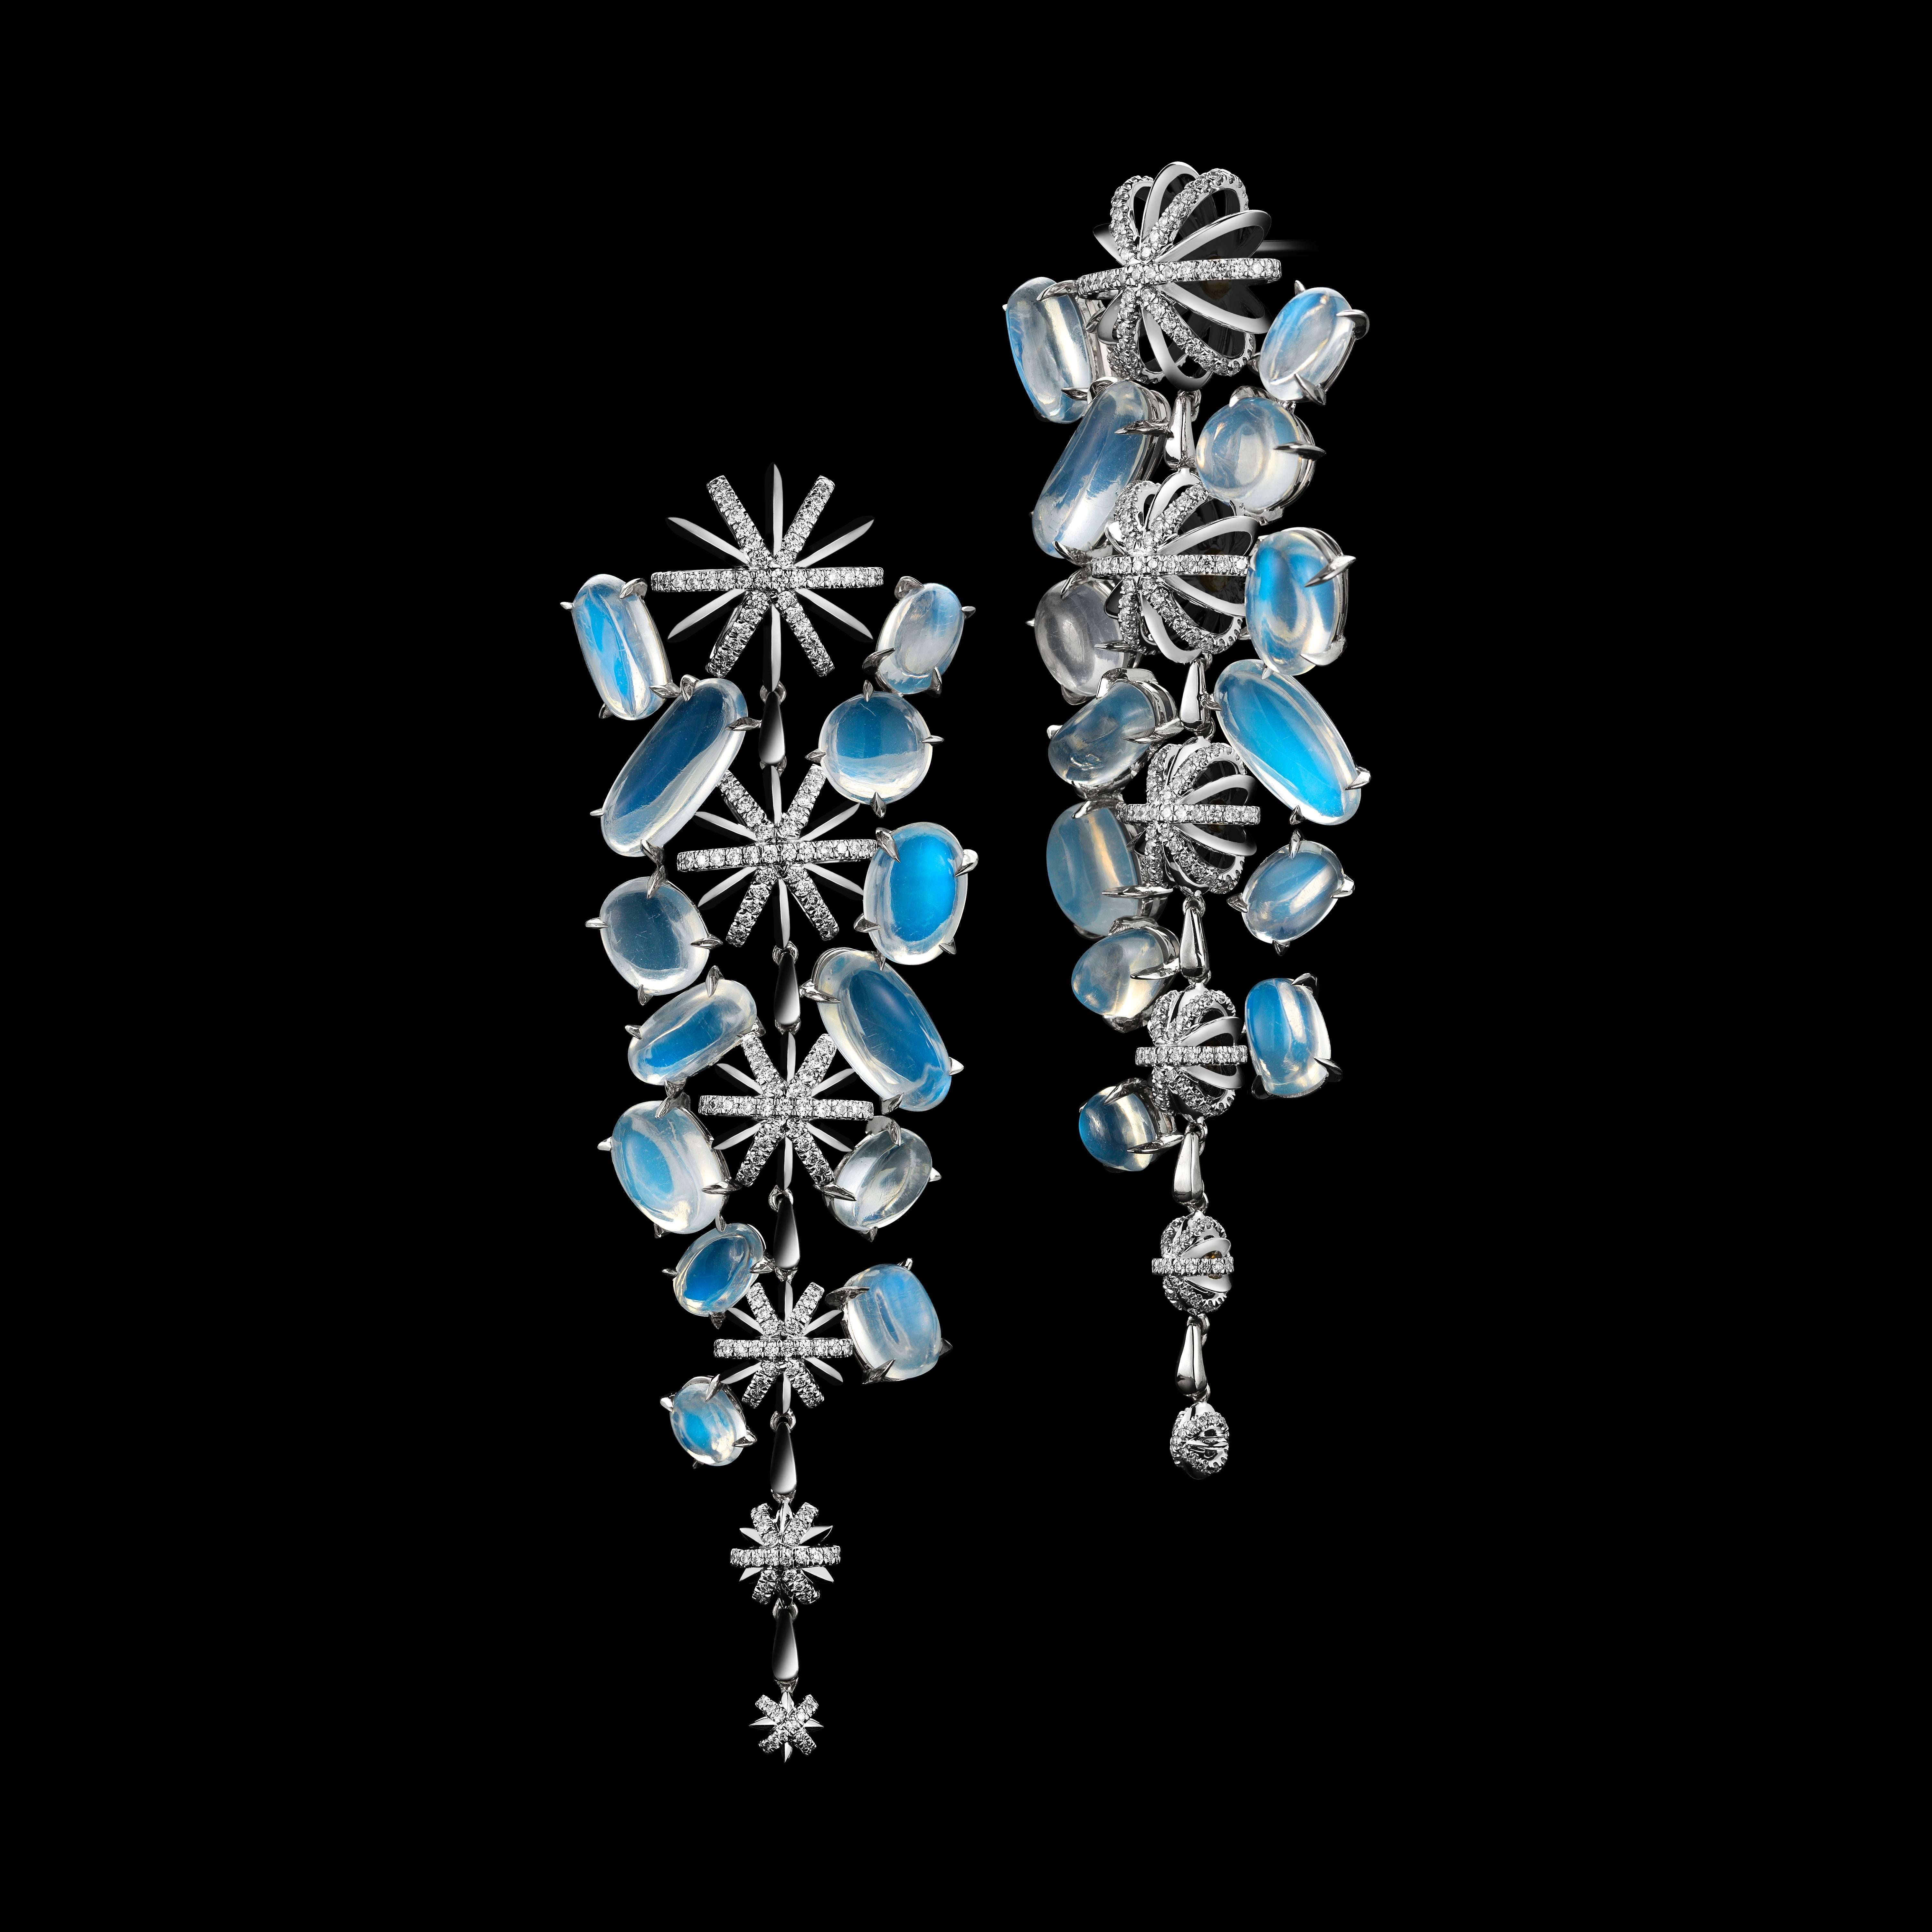 *Please contact us for more information on this piece or on creating your own Alexandra Mor custom Design.

A pair of Alexandra Mor signature Diamond Snowflake drop earrings enhanced with Moonstones. Moonstones weigh a total of 45.85 carats.